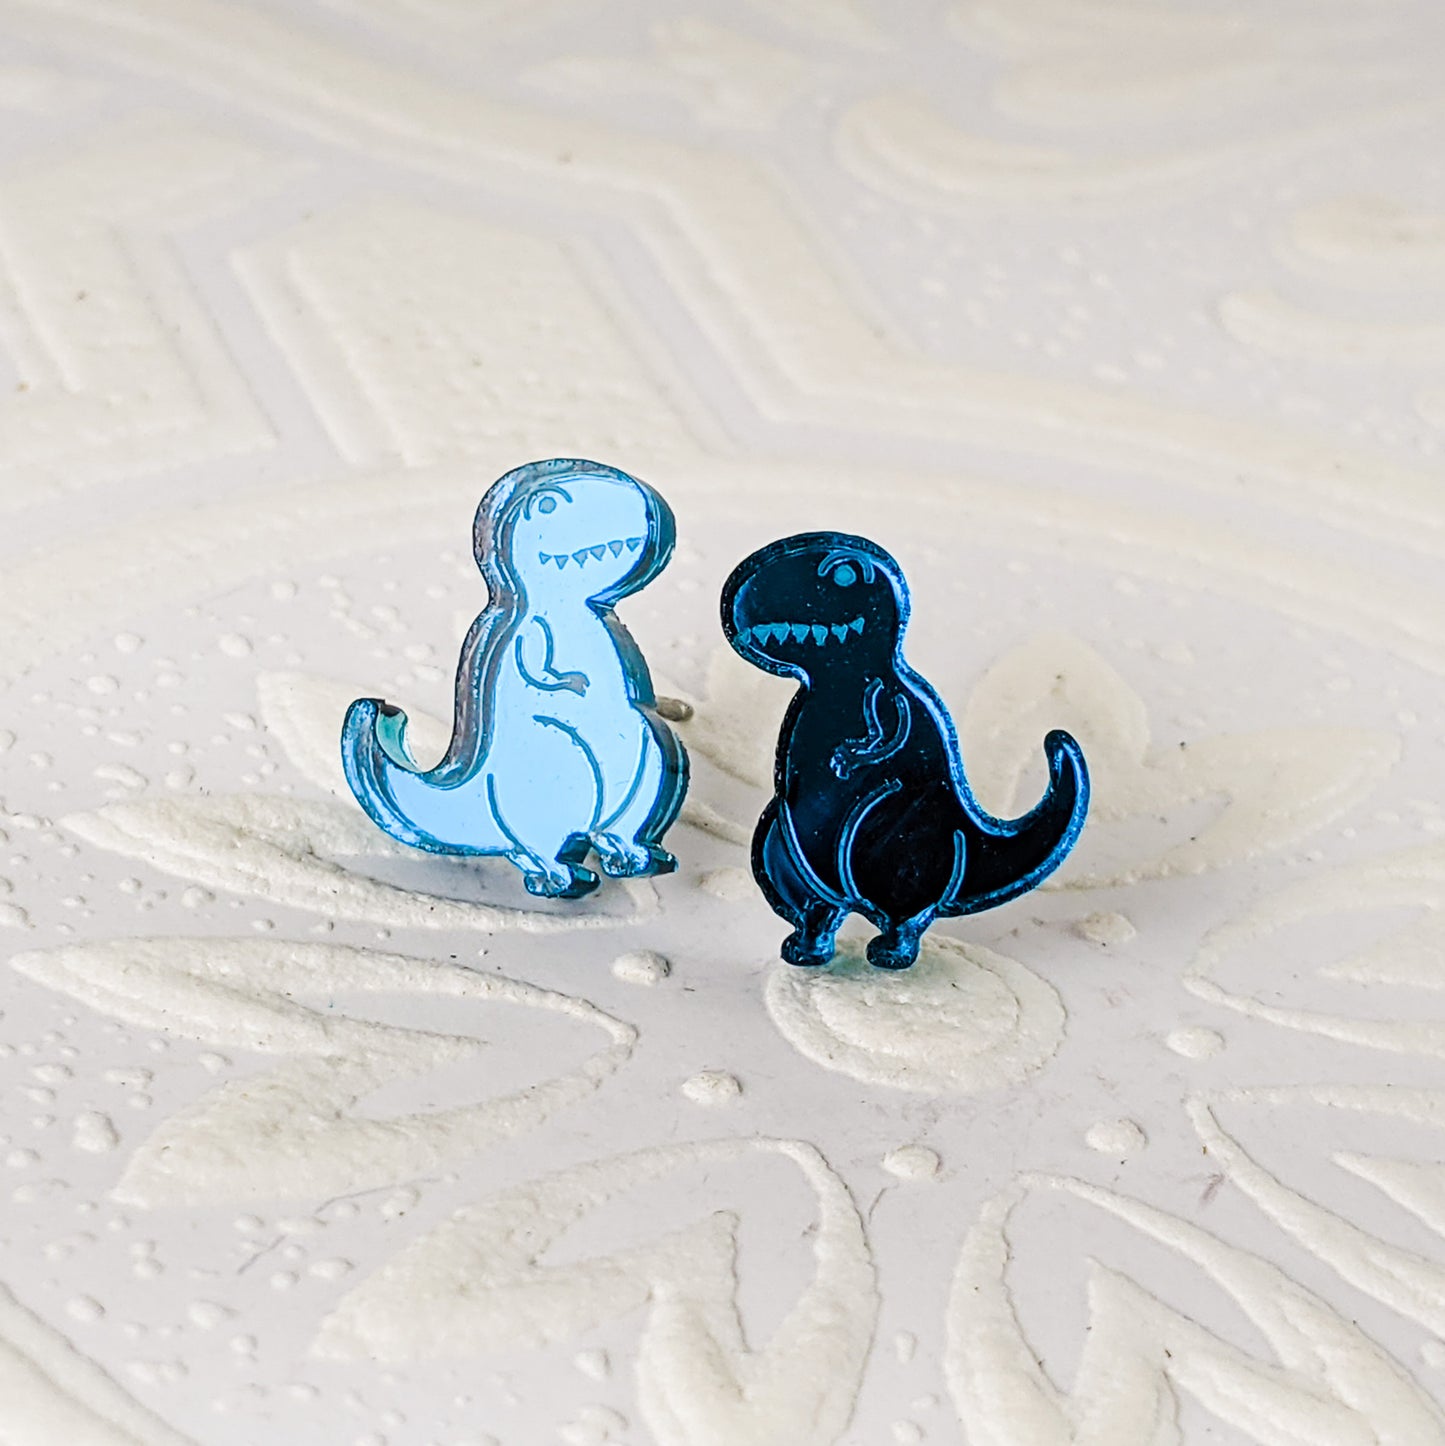 Cartoon Tyrannosaurus Rex stud earrings in teal mirrored acrylic, photographed to show the shine of the mirrored acrylic.  The dinosaurs are mirrored, and face towards each other.  By Isette.